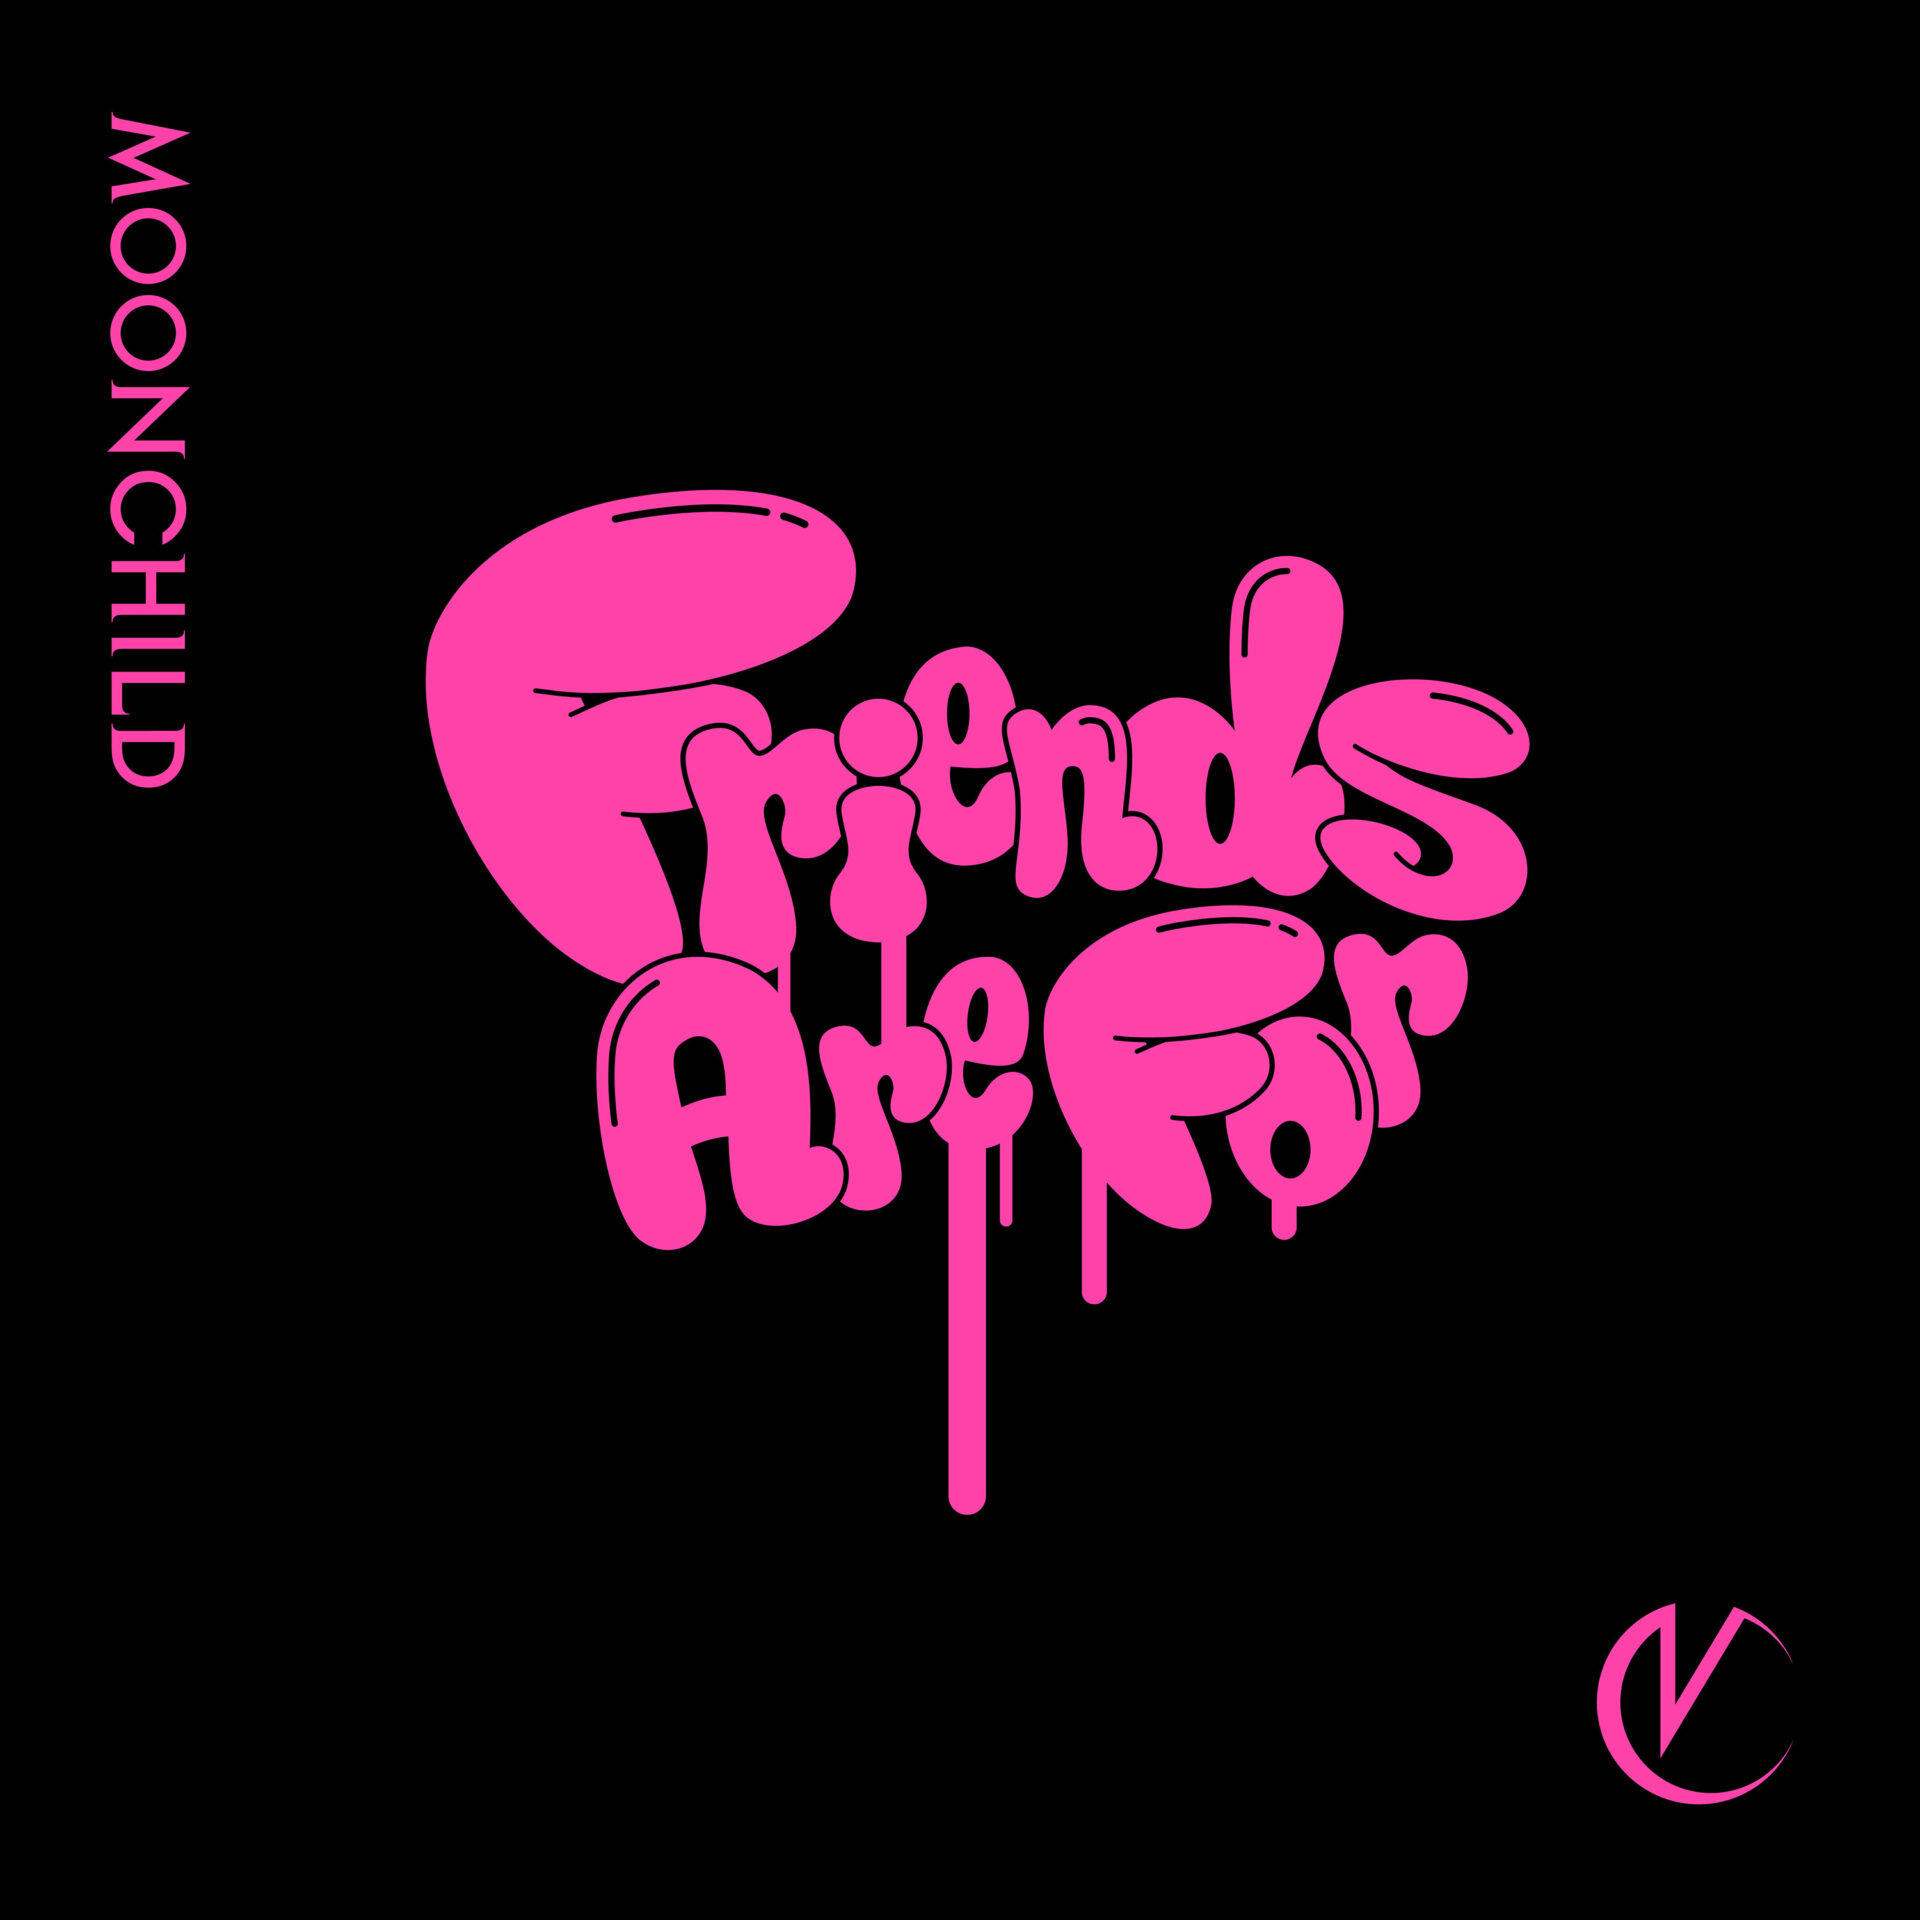 『Friends Are For』ジャケット